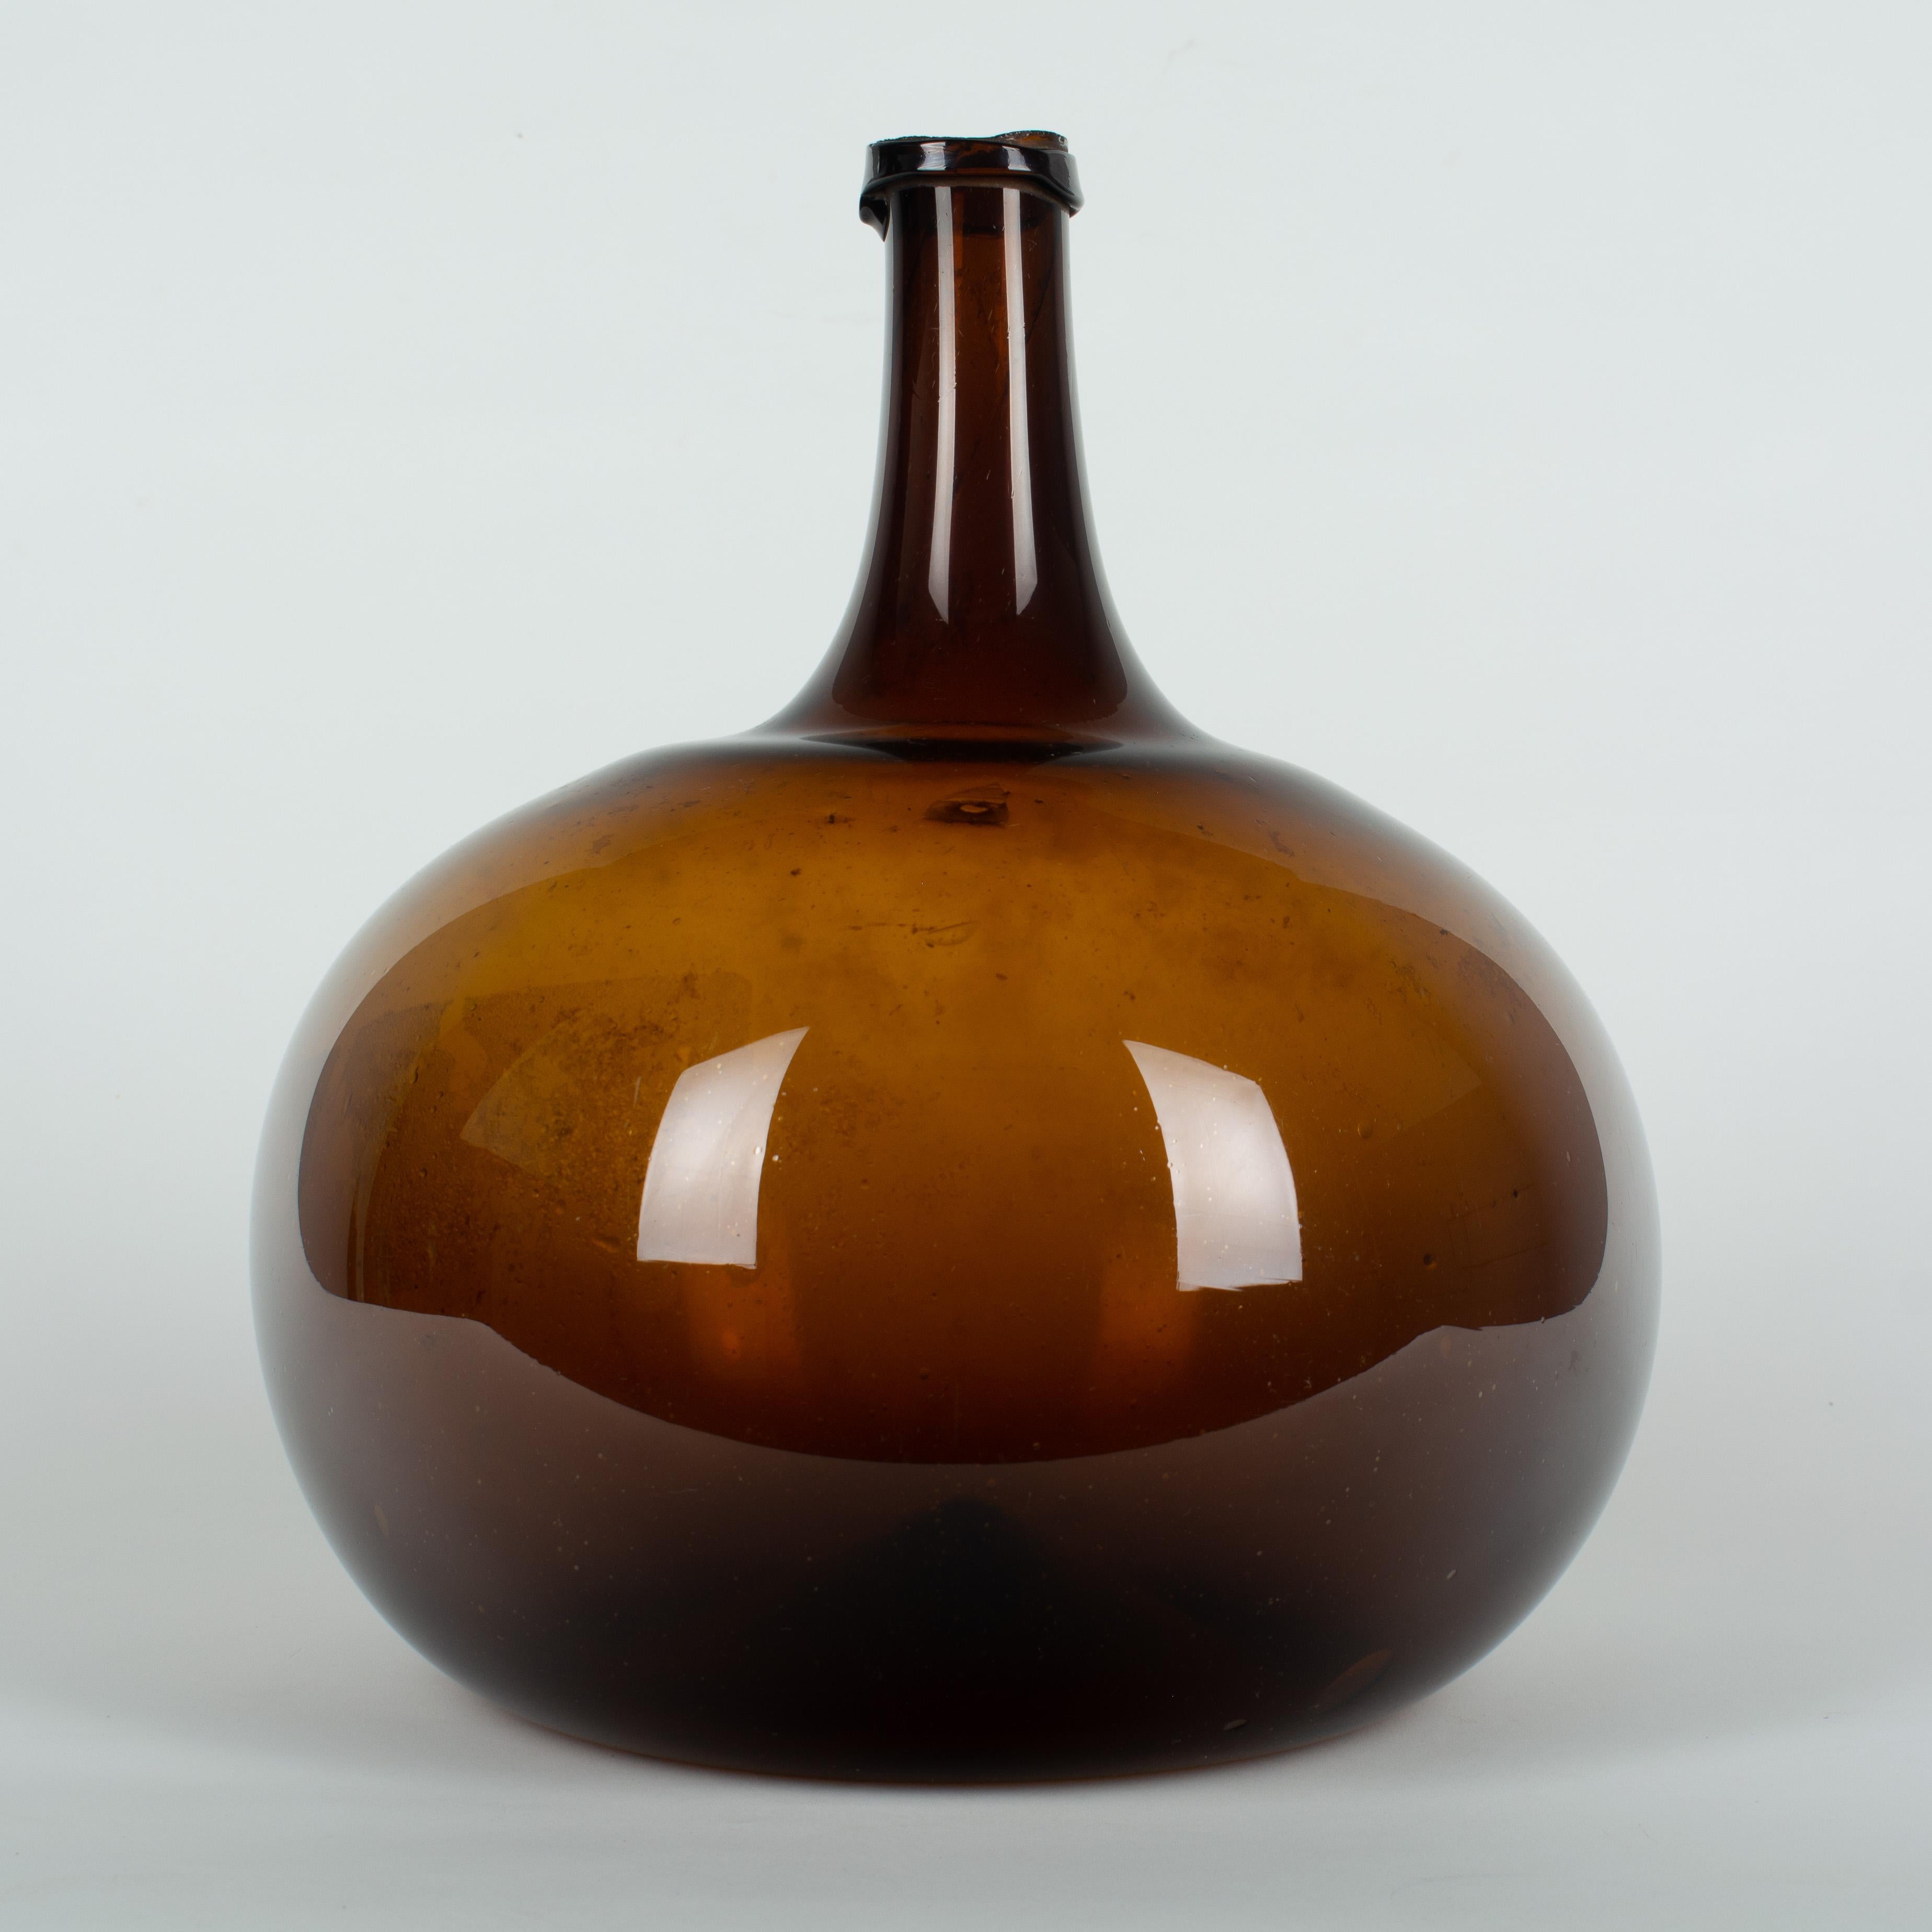 A 19th century French globular form amber demijohn bottle with air bubbles typical of hand blown glass. Please refer to photos for more details.